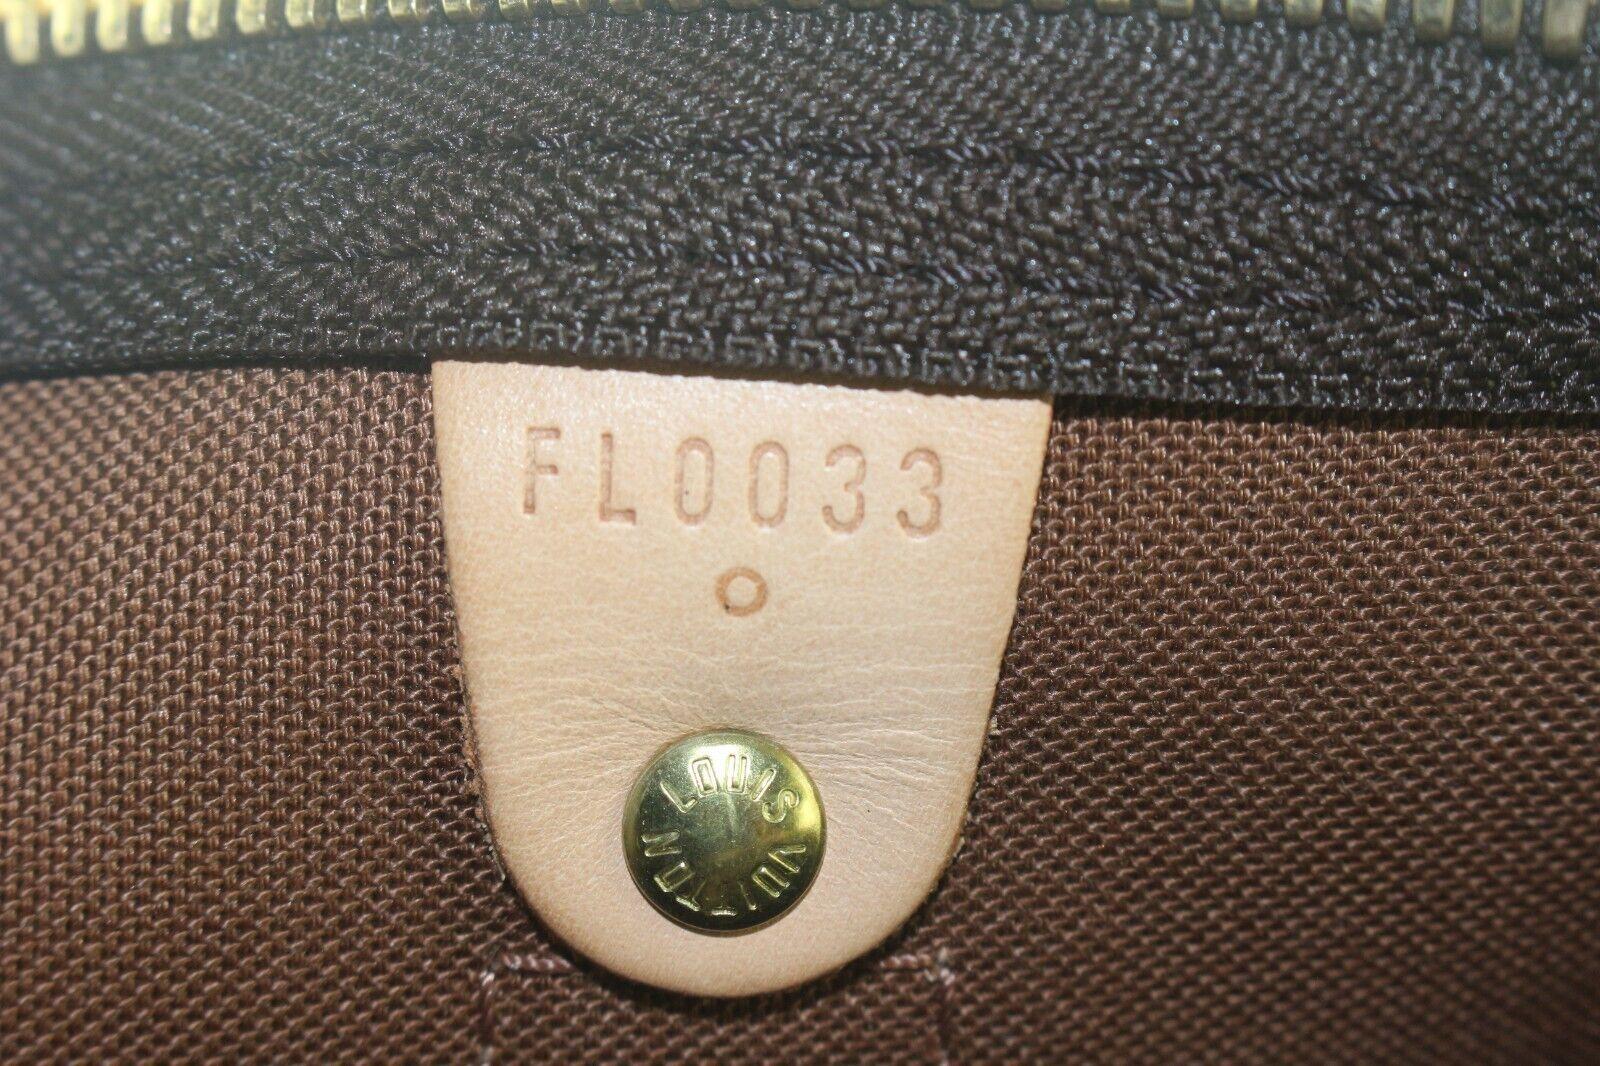 Date Code/Serial Number: FL003

Made In: France

Measurements: Length:  18